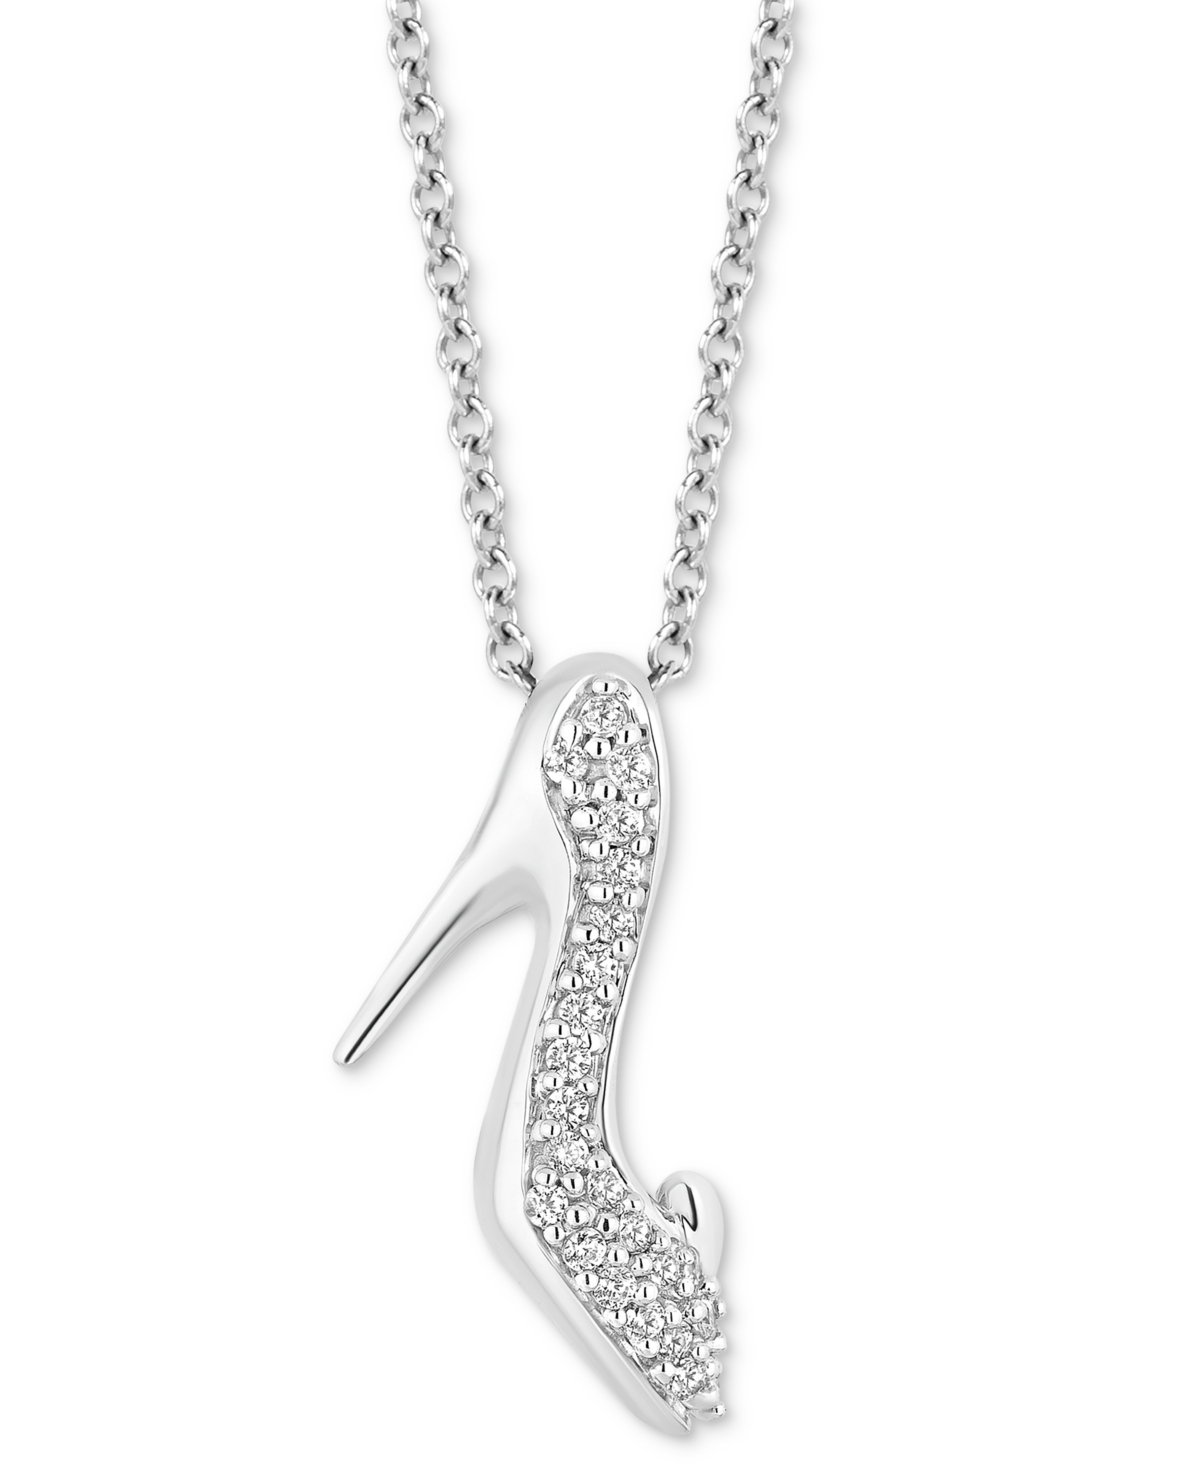 Diamond Cinderella Slipper Pendant Necklace (1/10 ct. t.w.) in Sterling Silver, 16" + 2" extender - Sterling Silver